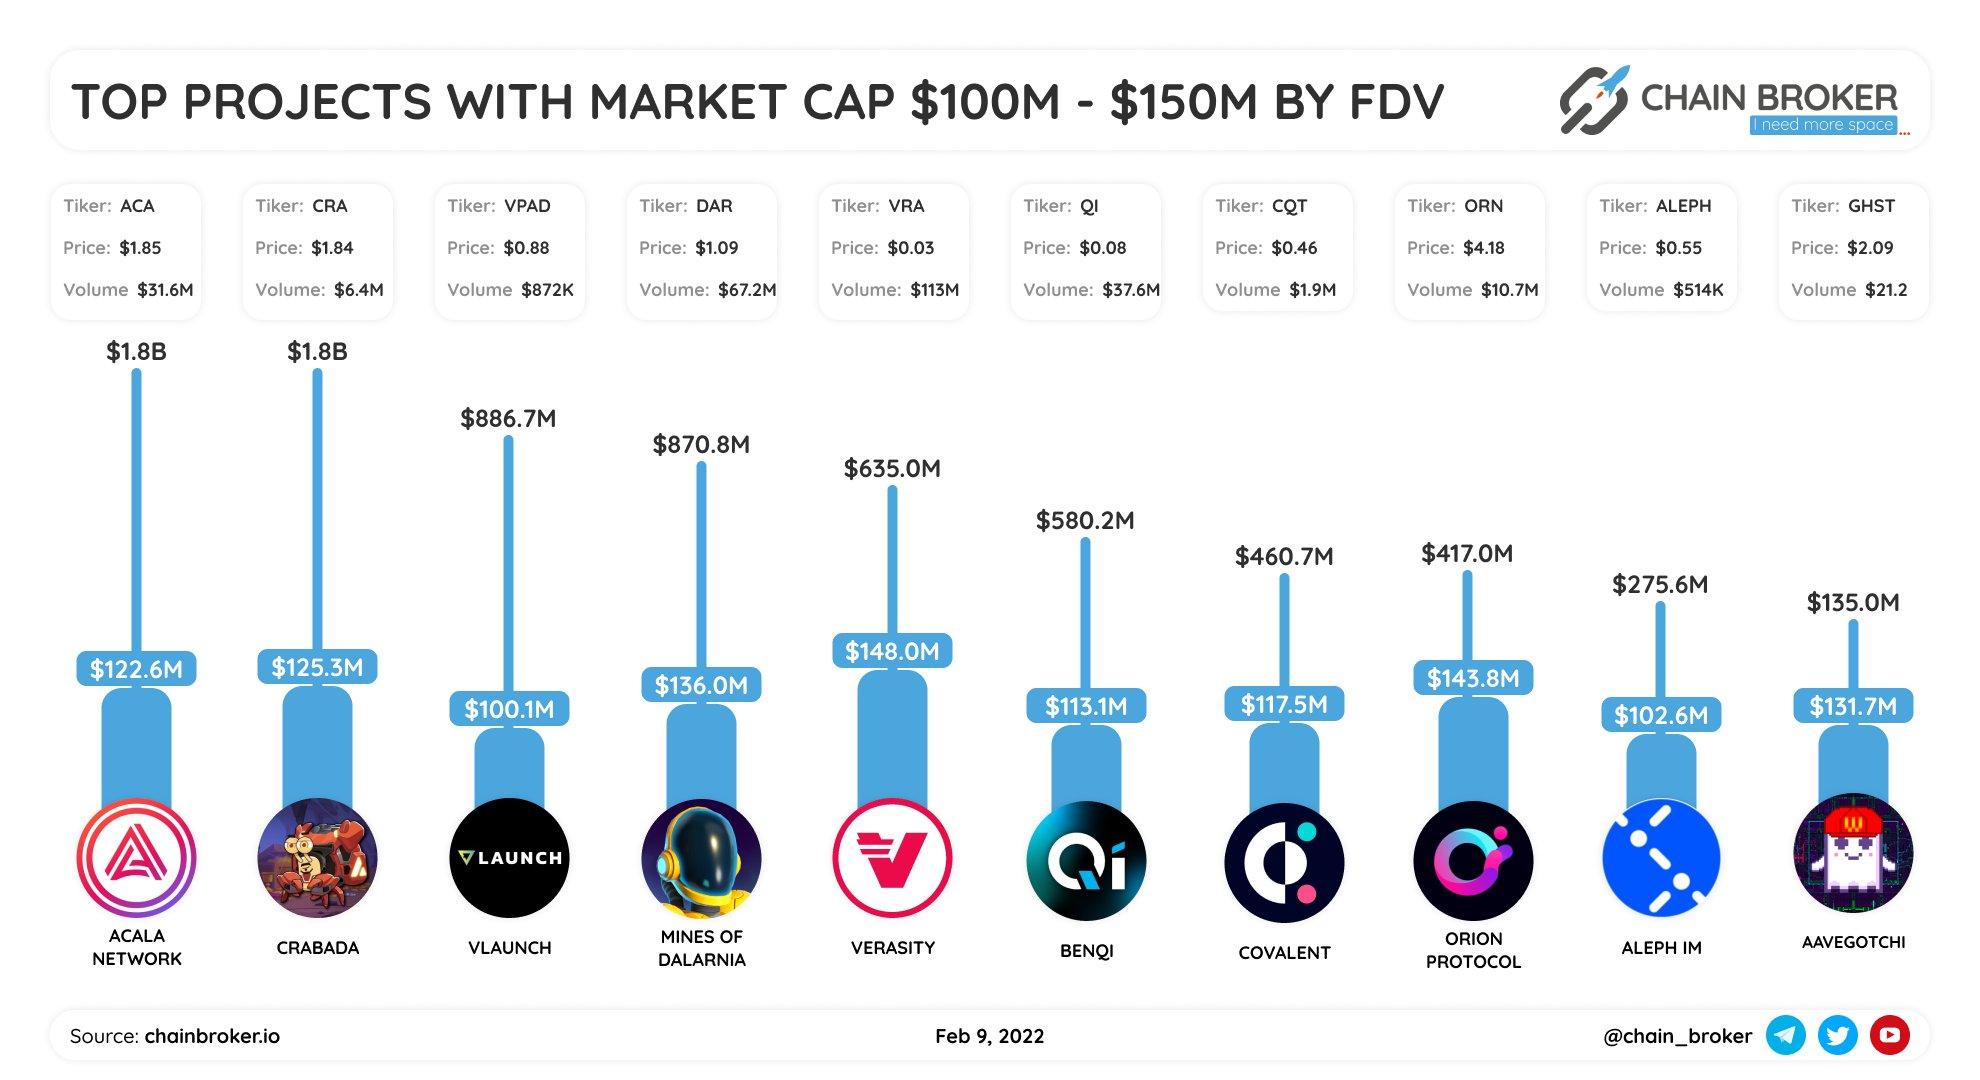 Top projects with market cap $100M-$150M ranged be FDV